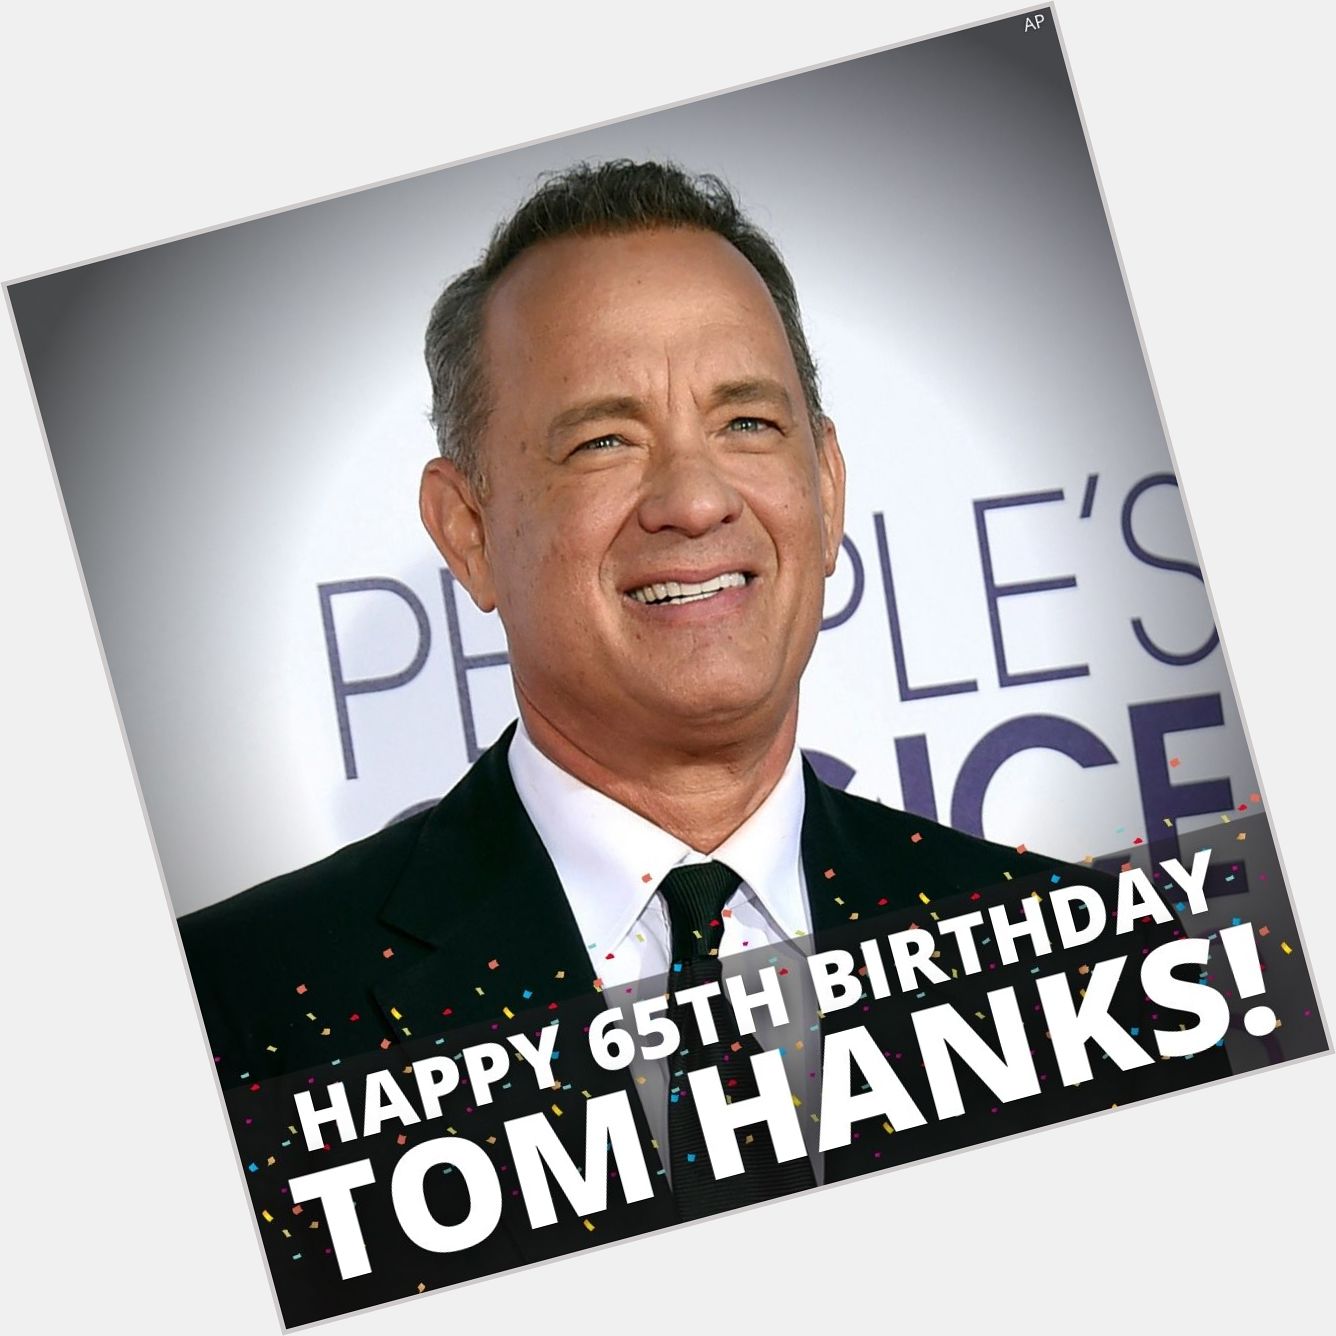 Happy birthday to Tom Hanks who turned 65 today!
What\s your favorite movie he\s in? 